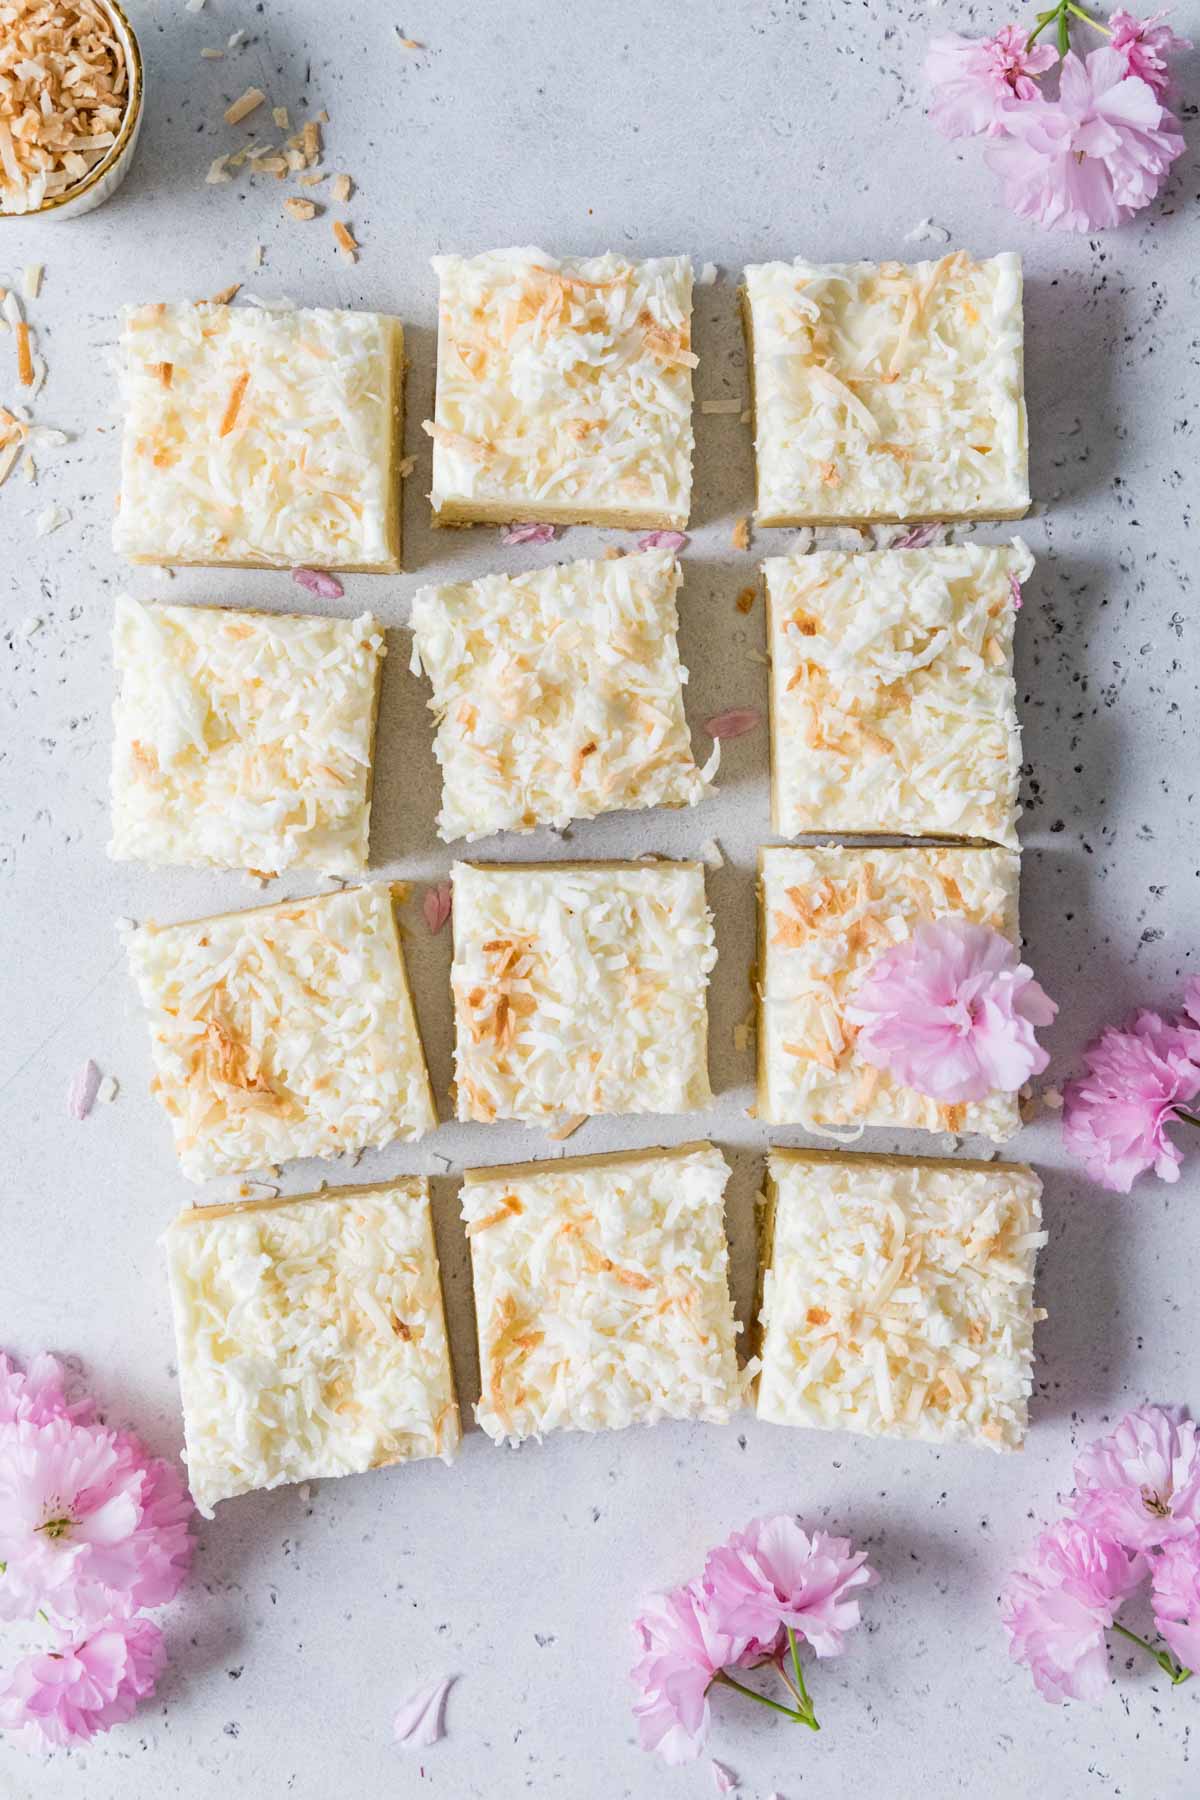 Overhead view of frosted coconut cream bars topped with toasted coconut.